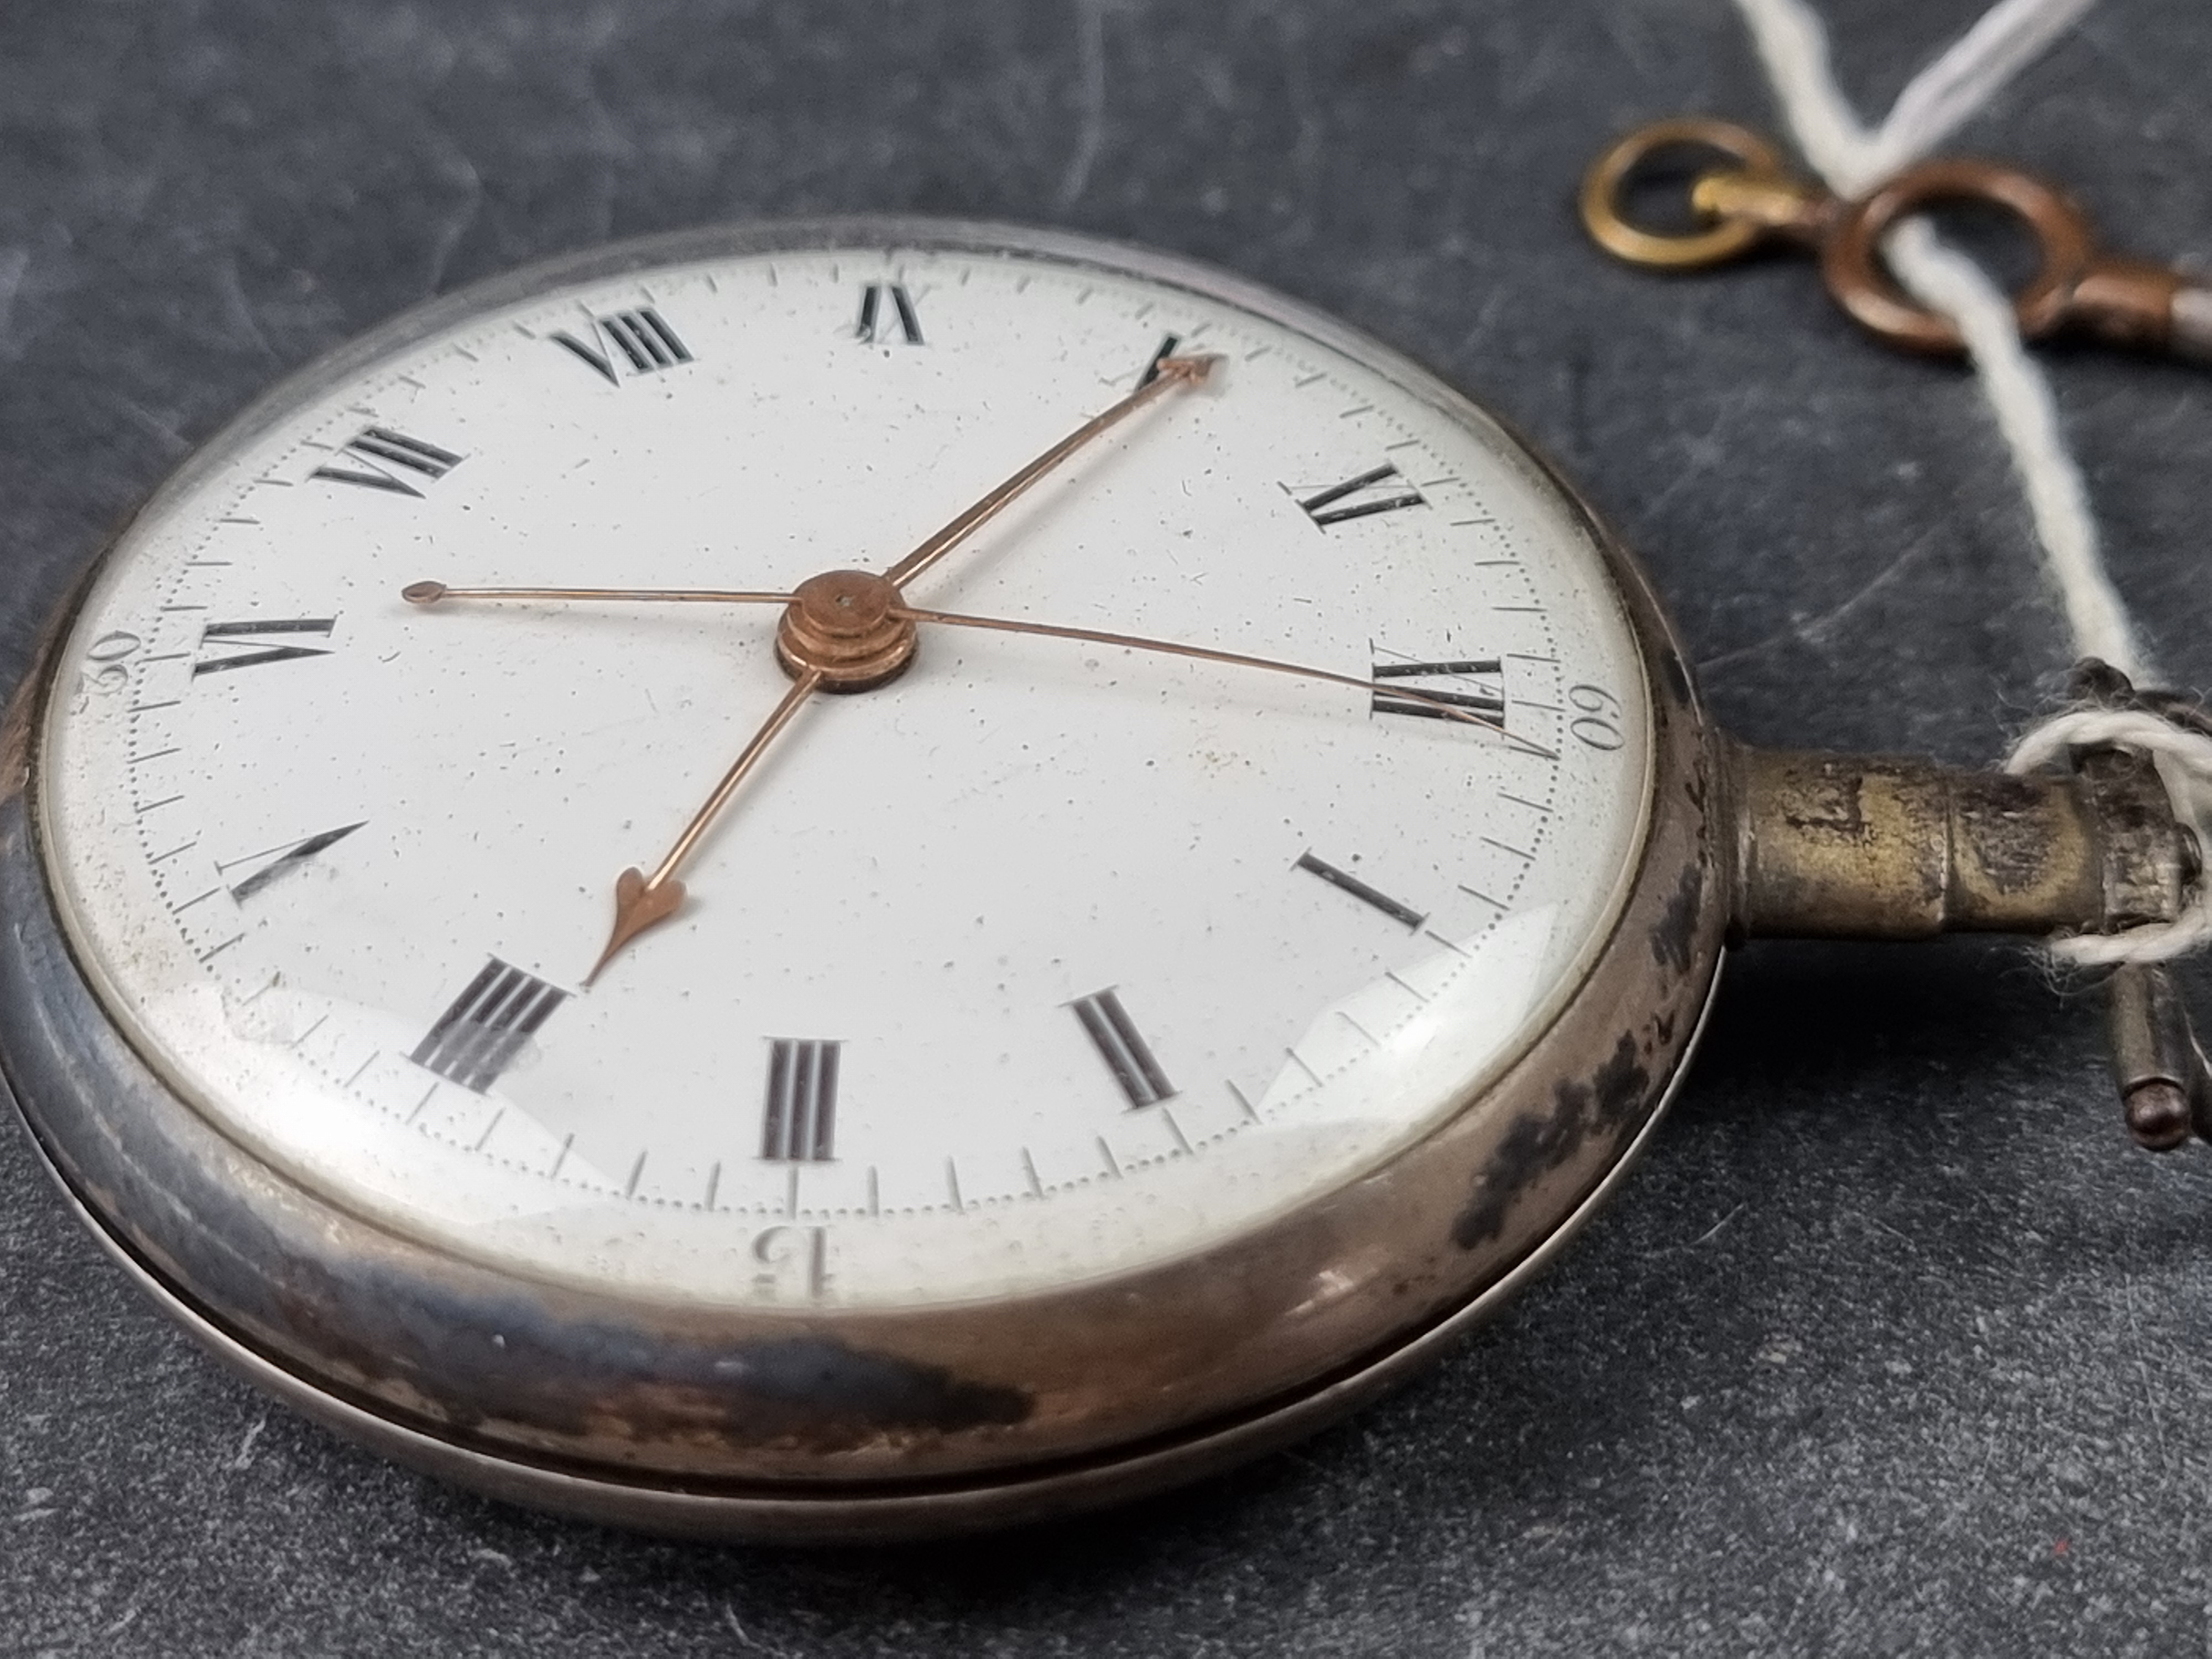 An unusual George III silver open face key wind skeletonised pocket watch, with duplex escapement - Image 2 of 6